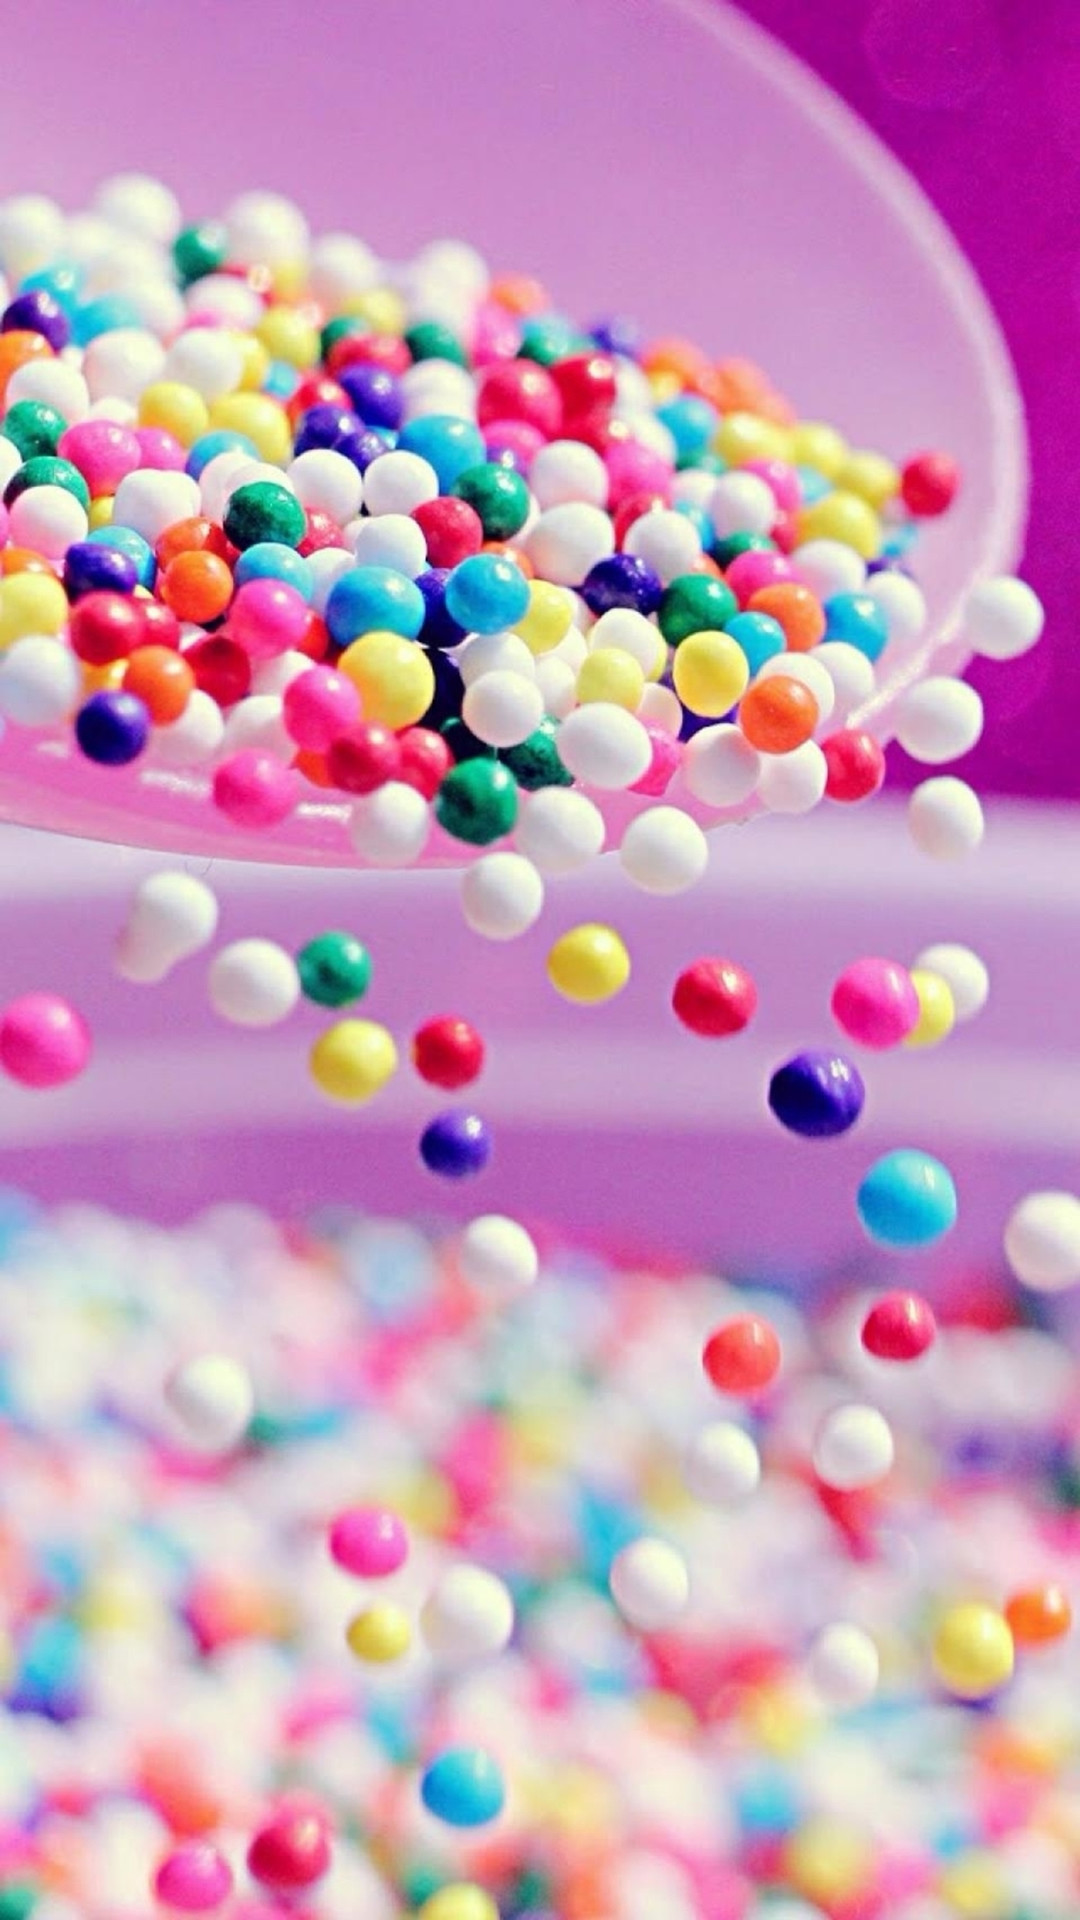 Wallpaper balls, background, colorful, candy, balls, pink, background, sweet,  pills, candy images for desktop, section текстуры - download